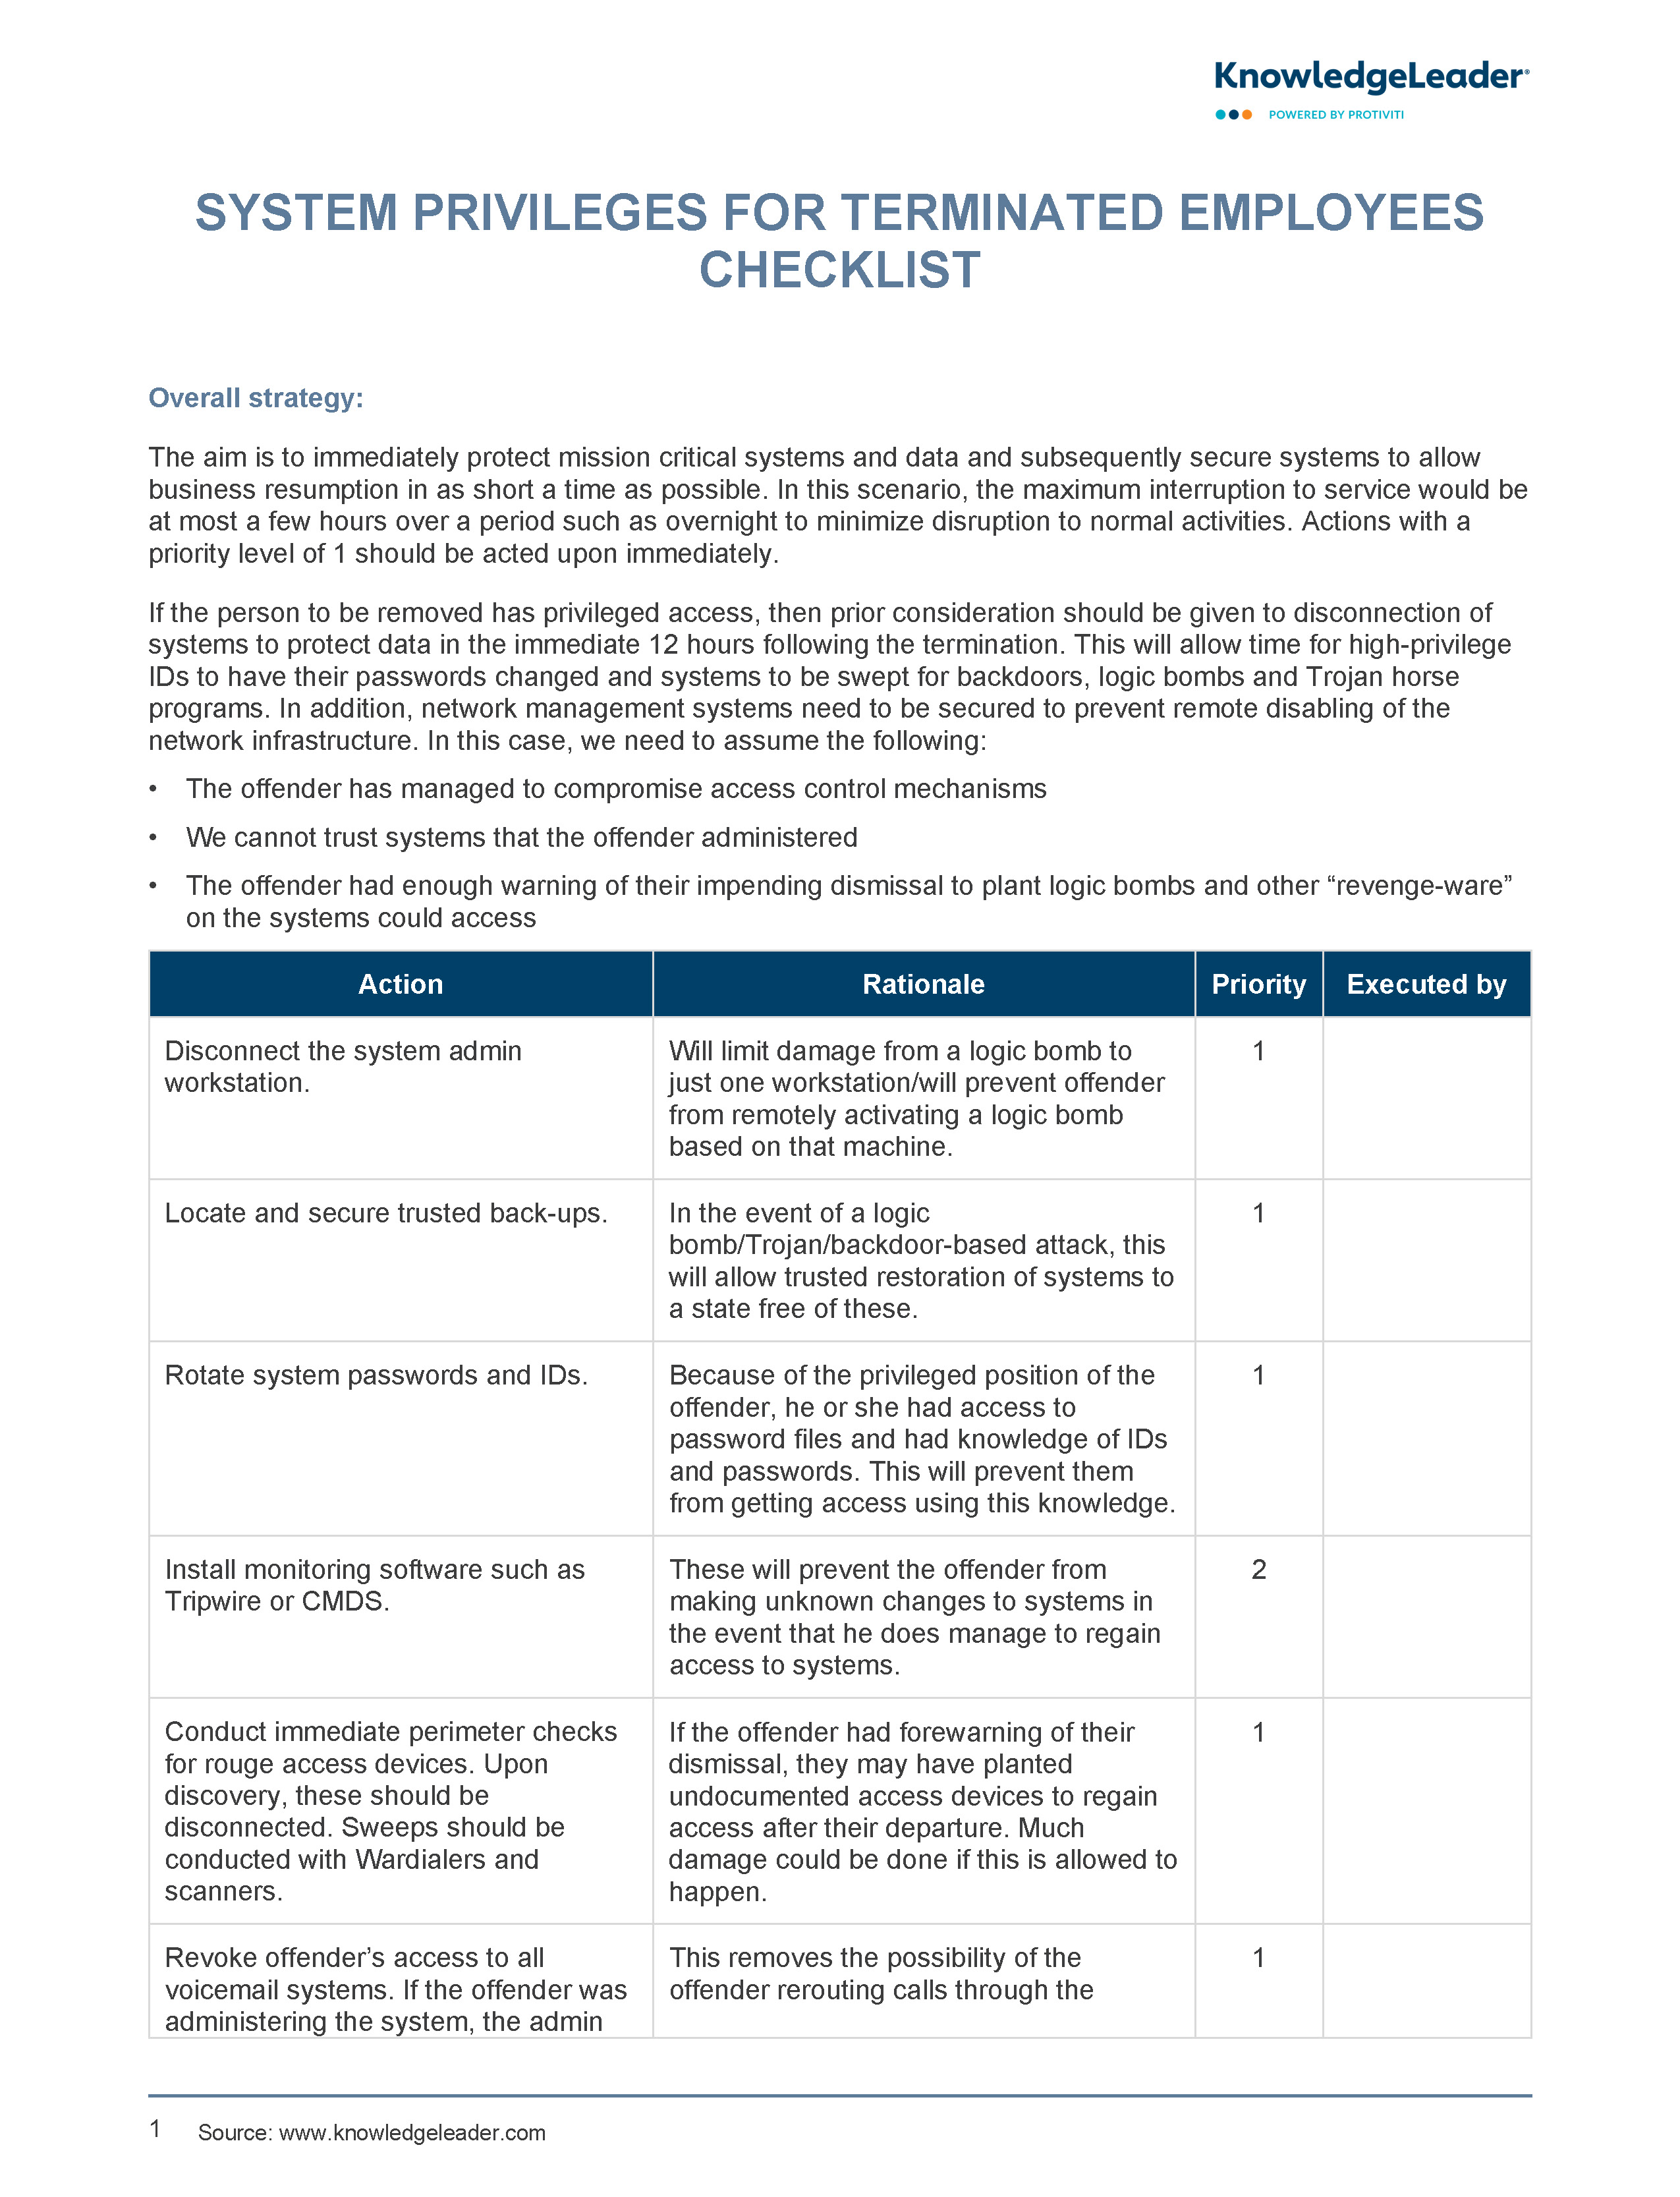 Screenshot of the first page of System Privileges for Terminated Employees Checklist